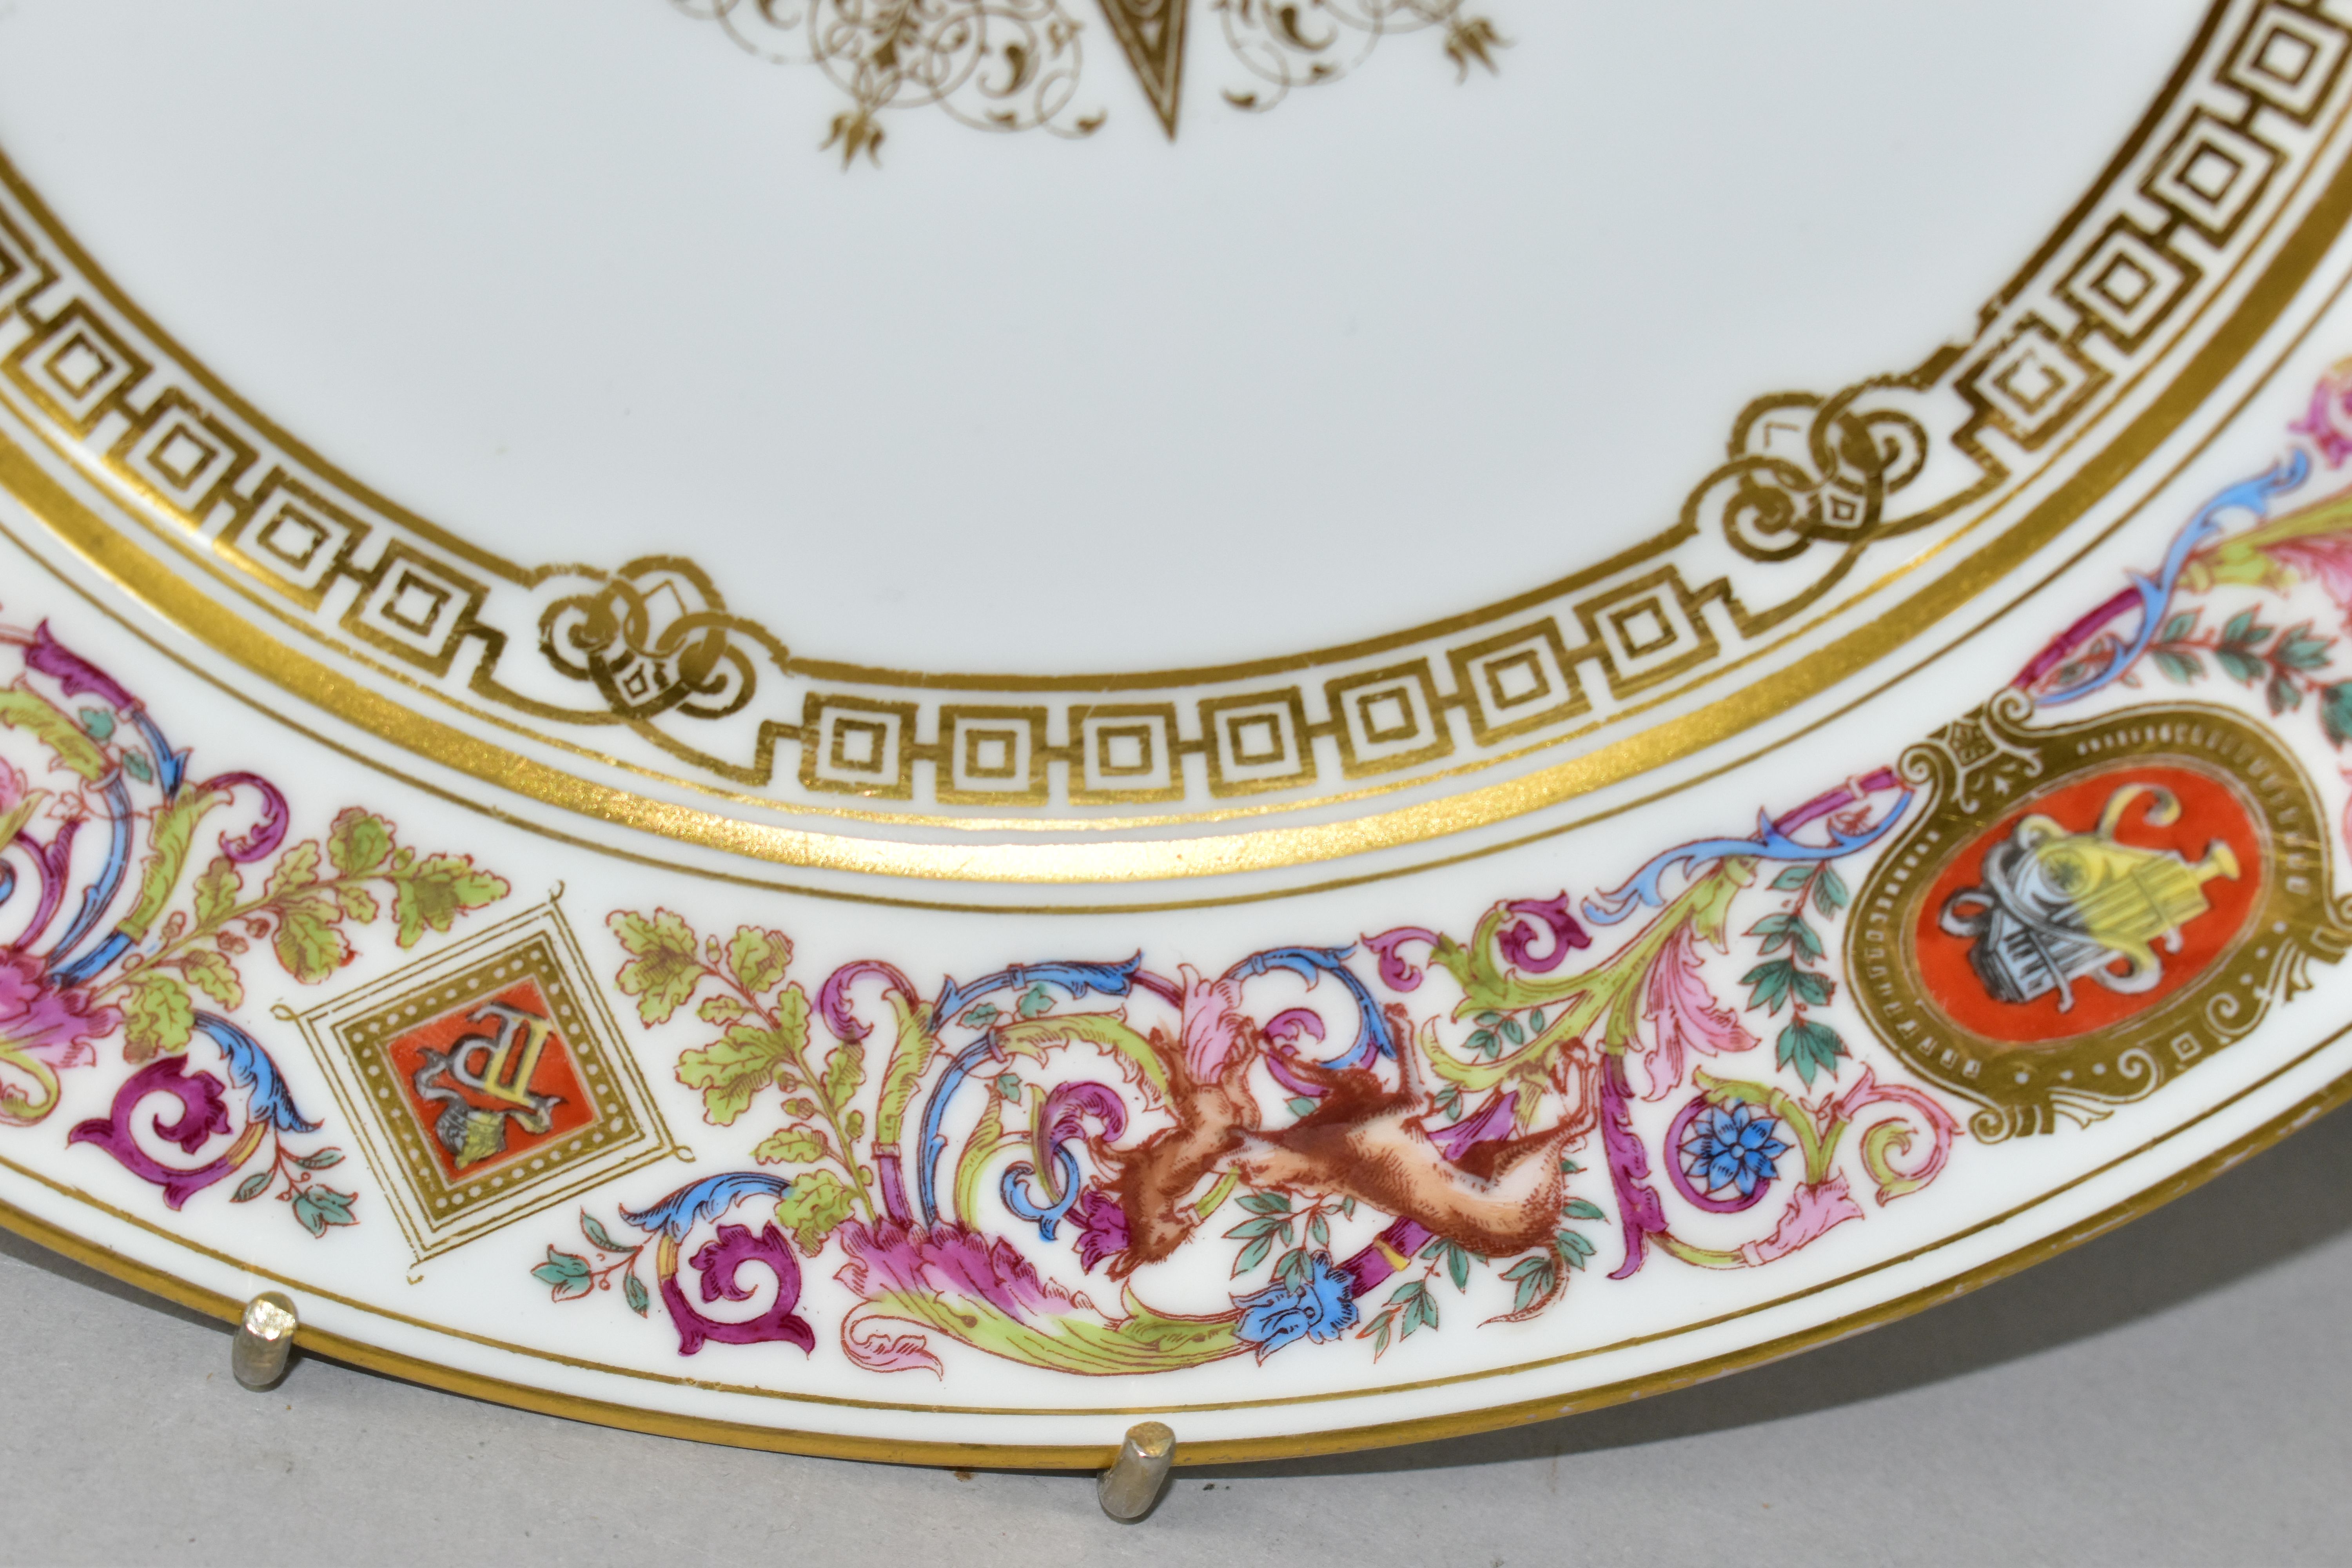 A SEVRES PORCELAIN DESSERT PLATE, from the Royal Hunting Service, featuring a scrolling border - Image 4 of 9